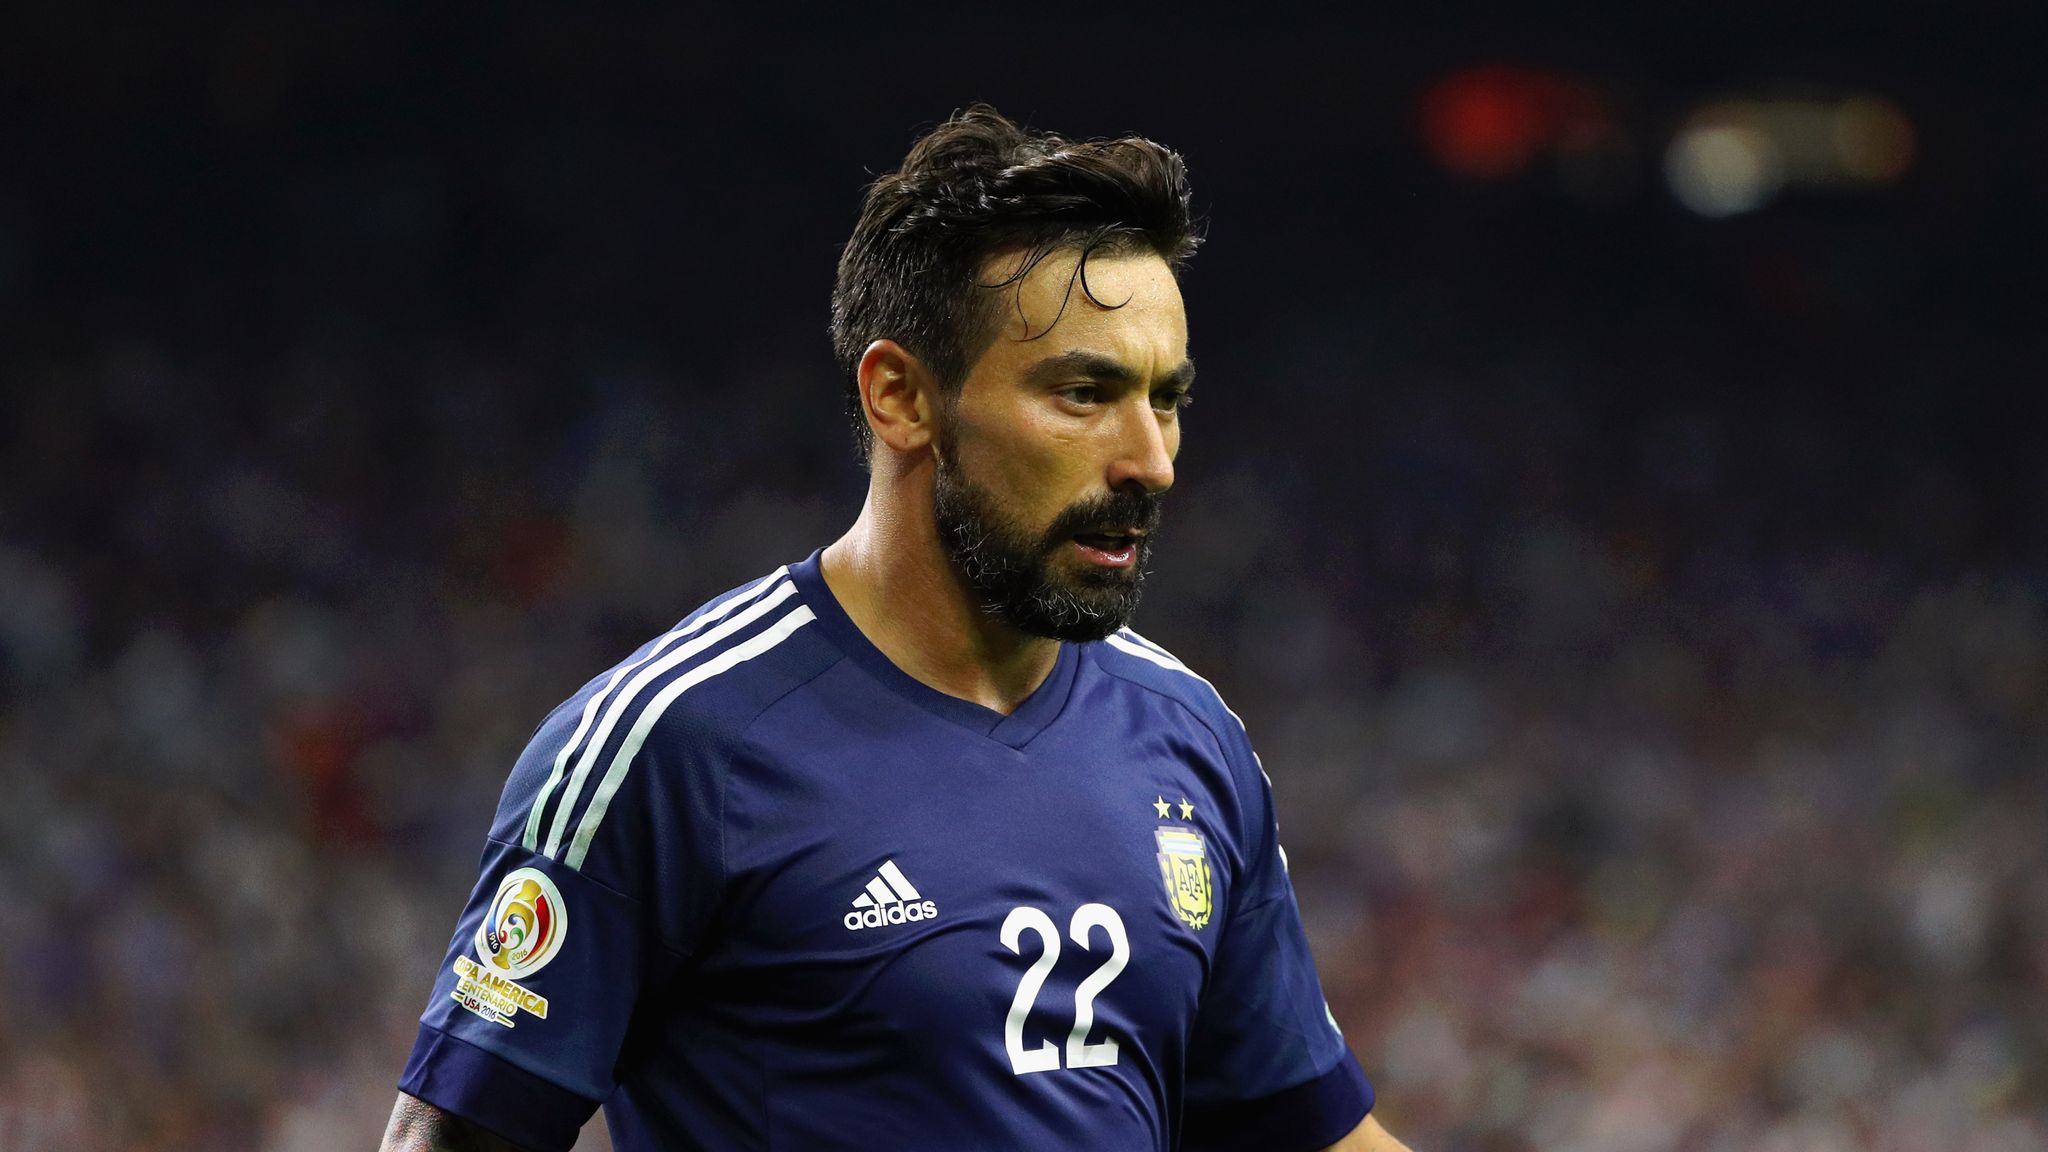 Ezequiel Lavezzi issues apology over offensive photograph